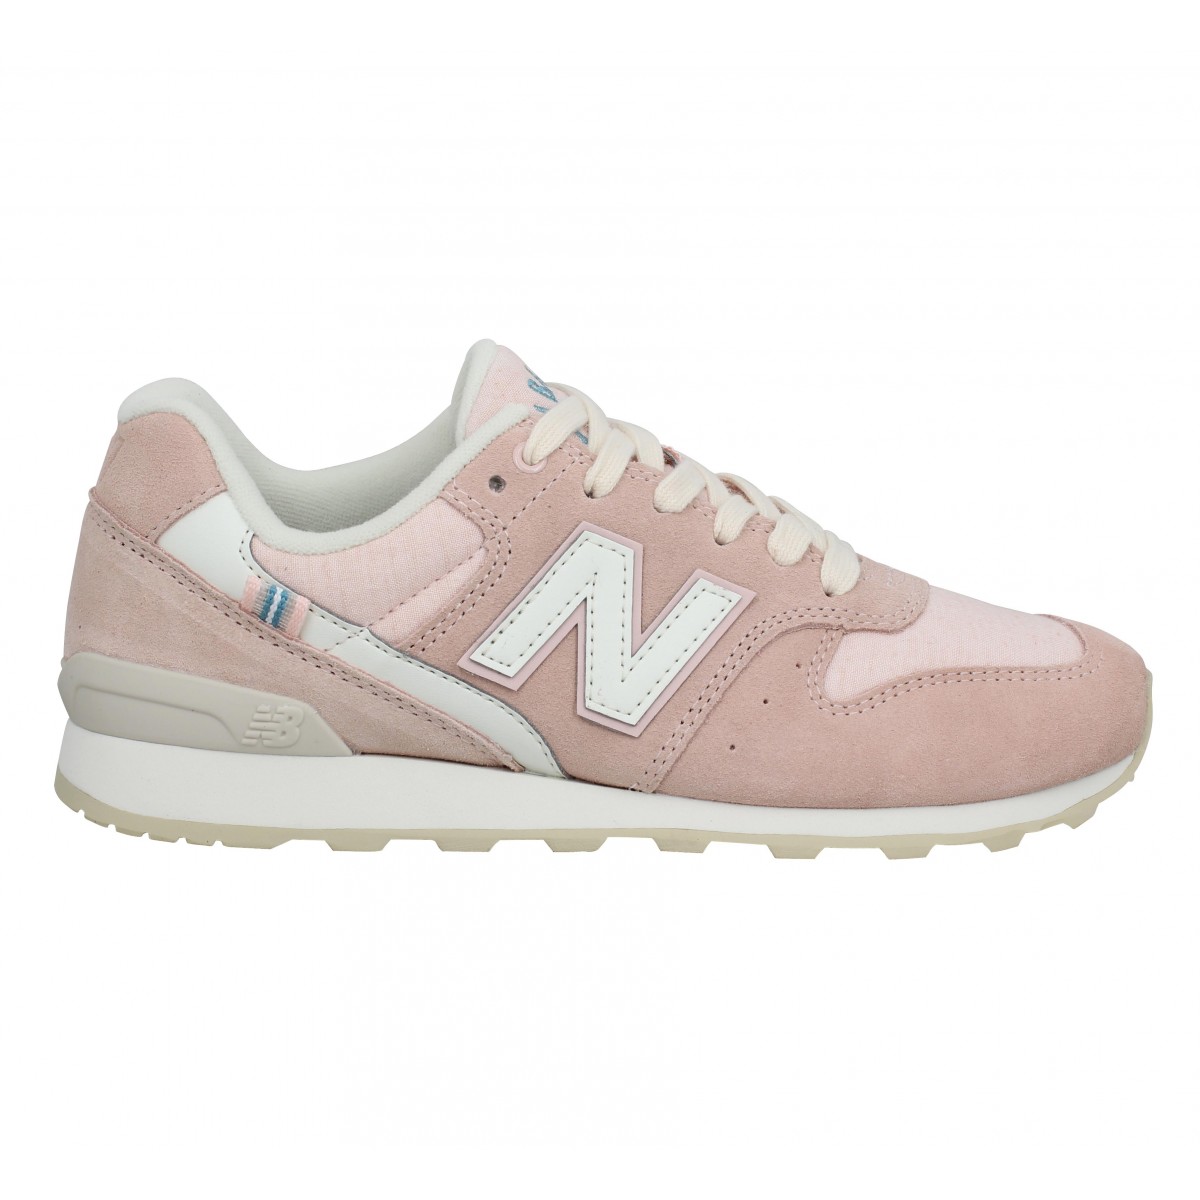 Chaussures New balance 996 velours femme rose femme | Fanny chaussures